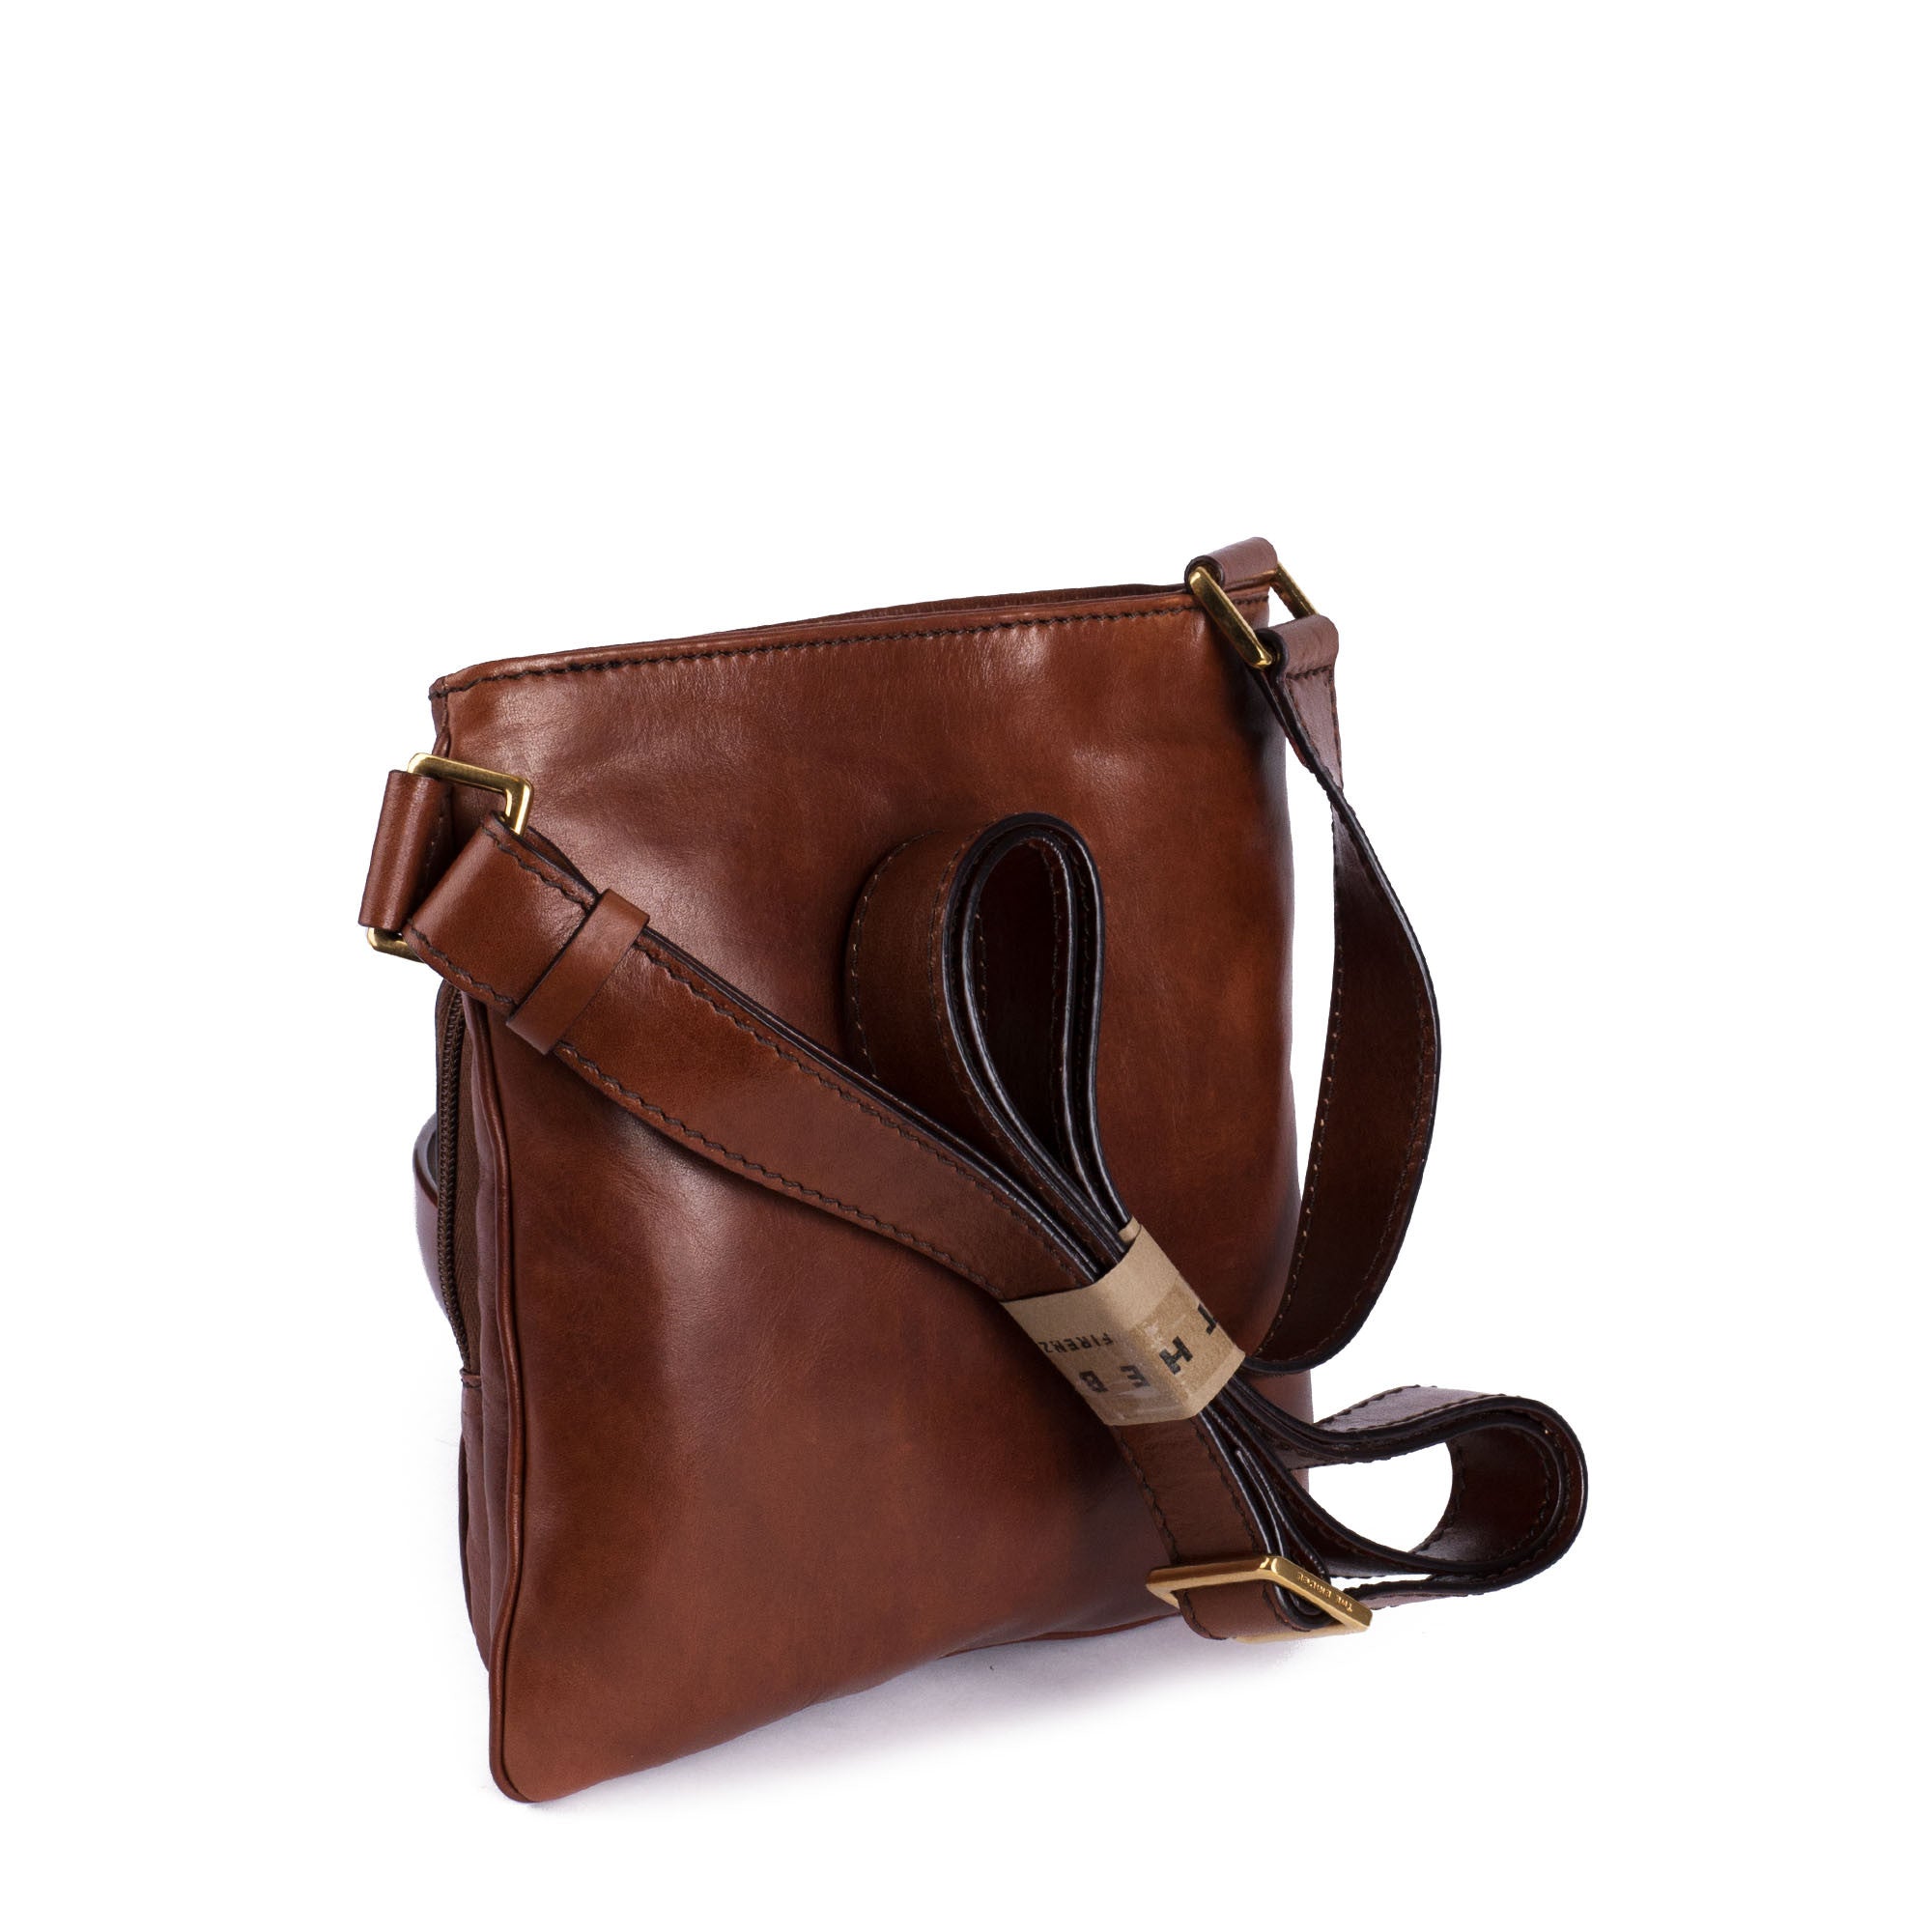 Our Guide To The Satchel: History, FAQs & Alternatives – MAHI Leather